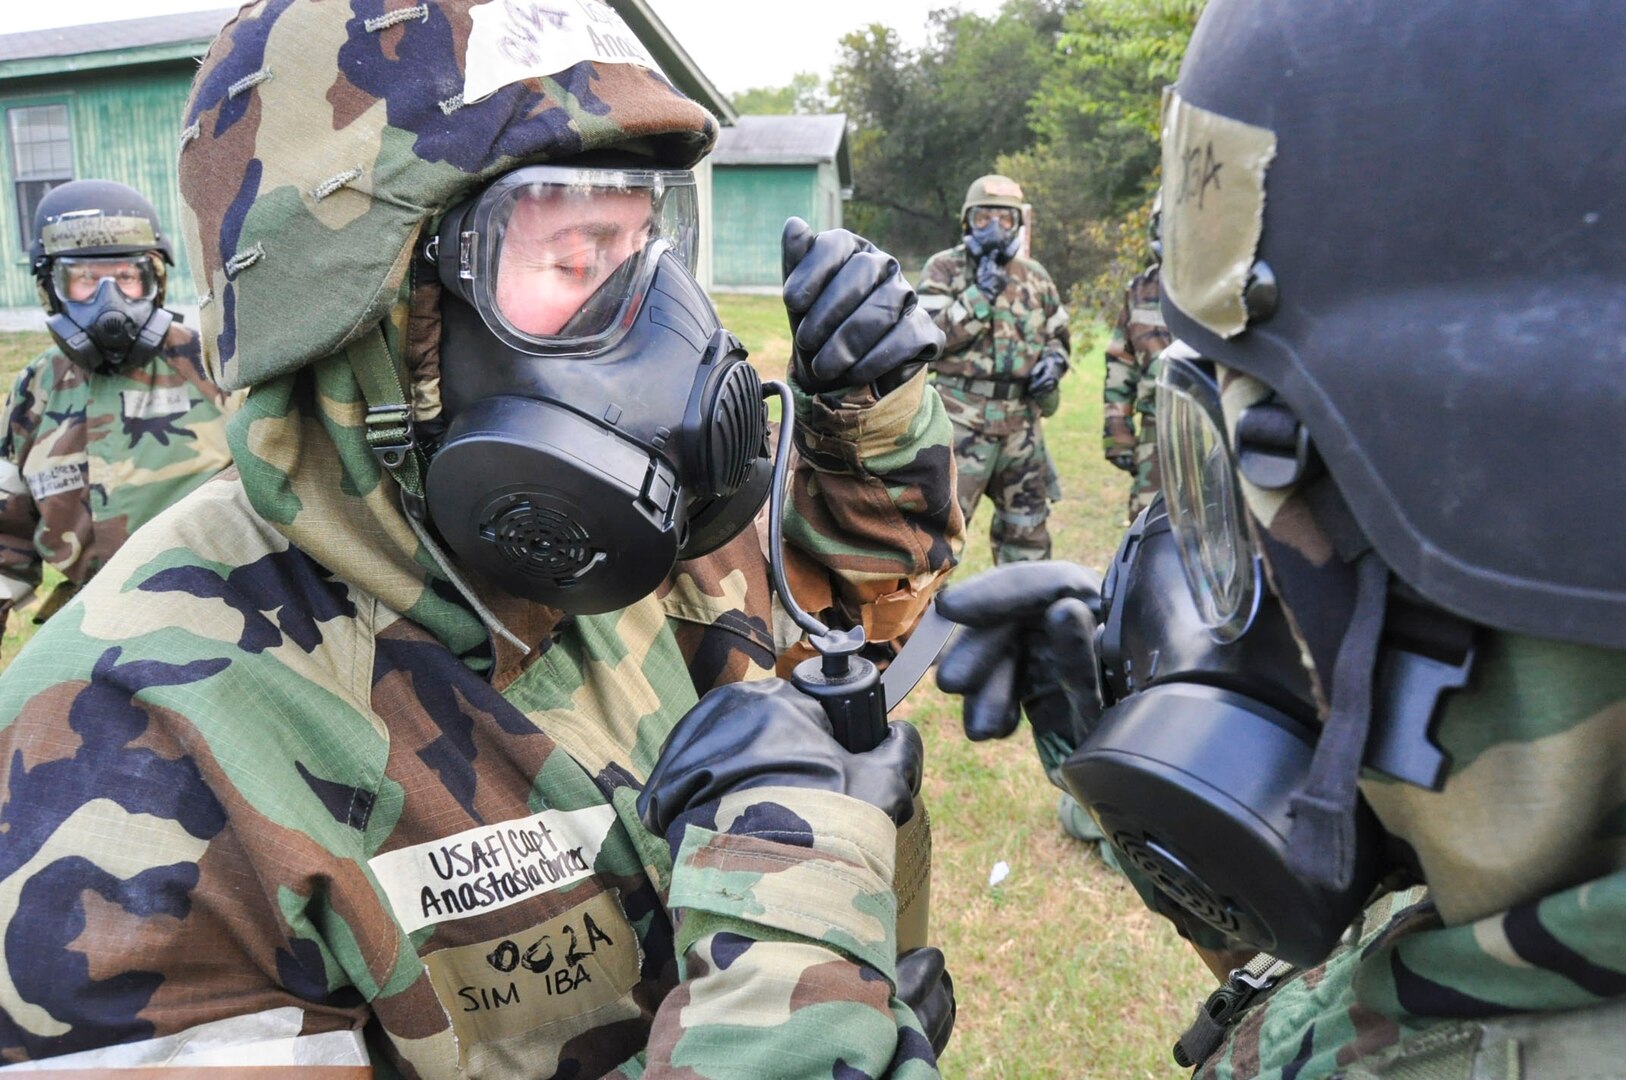 Capt. Anastasia Corker of the 433rd Aeromedical Staging Squadron demonstrates how to drink from a canteen through her gas mask during the Steel Thunder exercise Nov. 5, 2016 at Joint Base San Antonio-Lackland. The exercise is designed to test the unit’s responsiveness to a Chemical, Biological, Radiological, Nuclear and high-yield Explosives attack and its effectiveness while wearing the Mission Oriented Protective Posture gear. (U.S. Air Force photo/Senior Airman Bryan Swink)